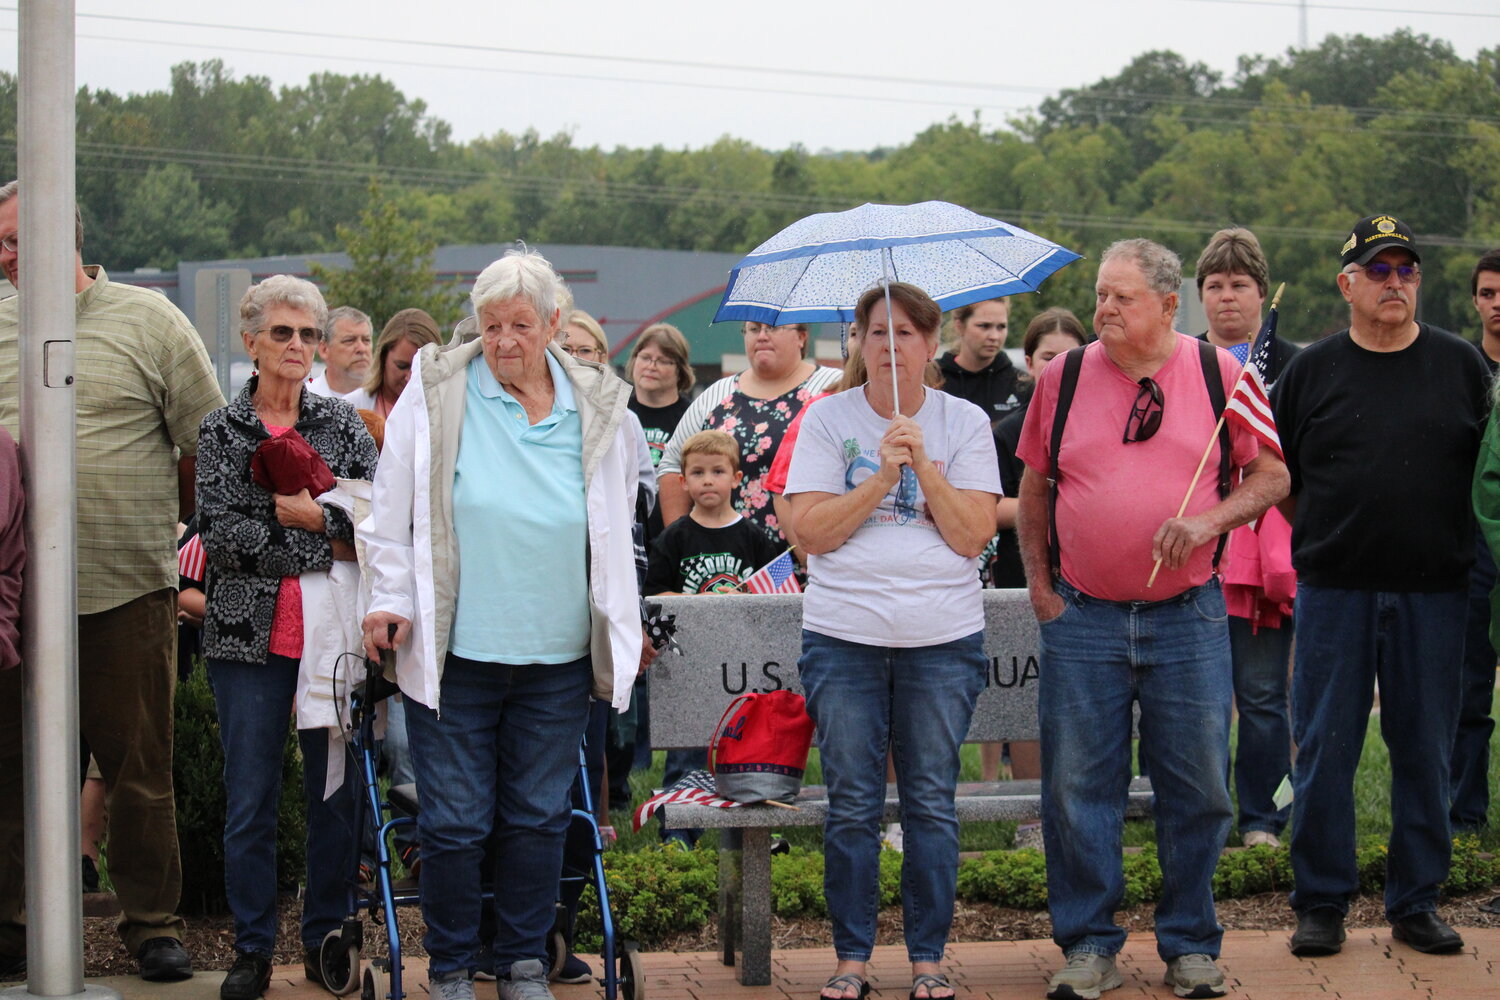 Members of the crowd stand during the Sept. 11 ceremony.